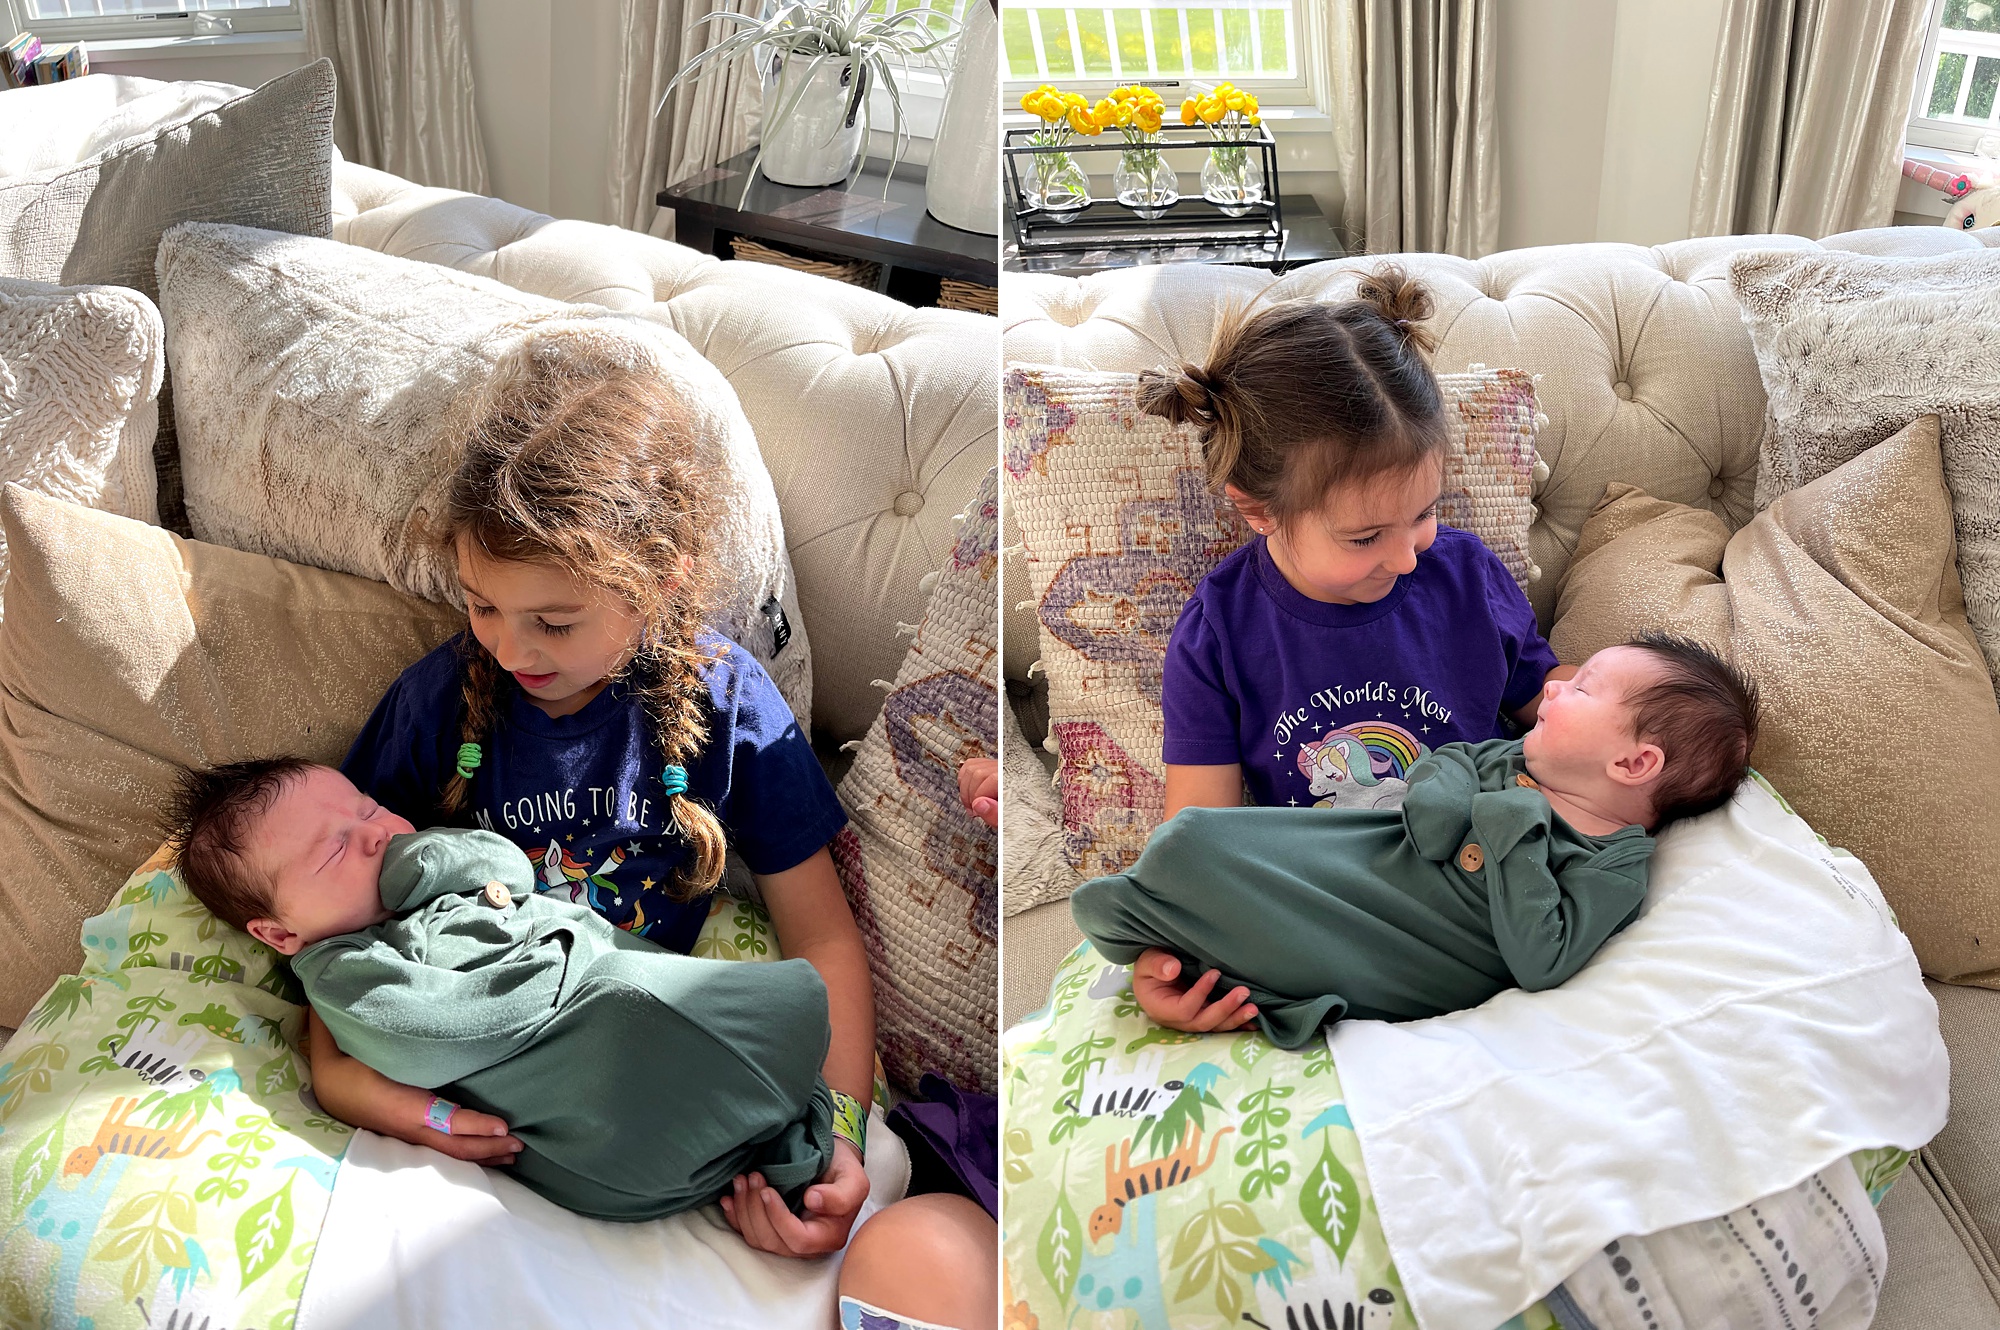 March of Dimes: Sara Zarrella Photography's Charity in 2021. Our story with the March of Dimes and our son's hospital stay